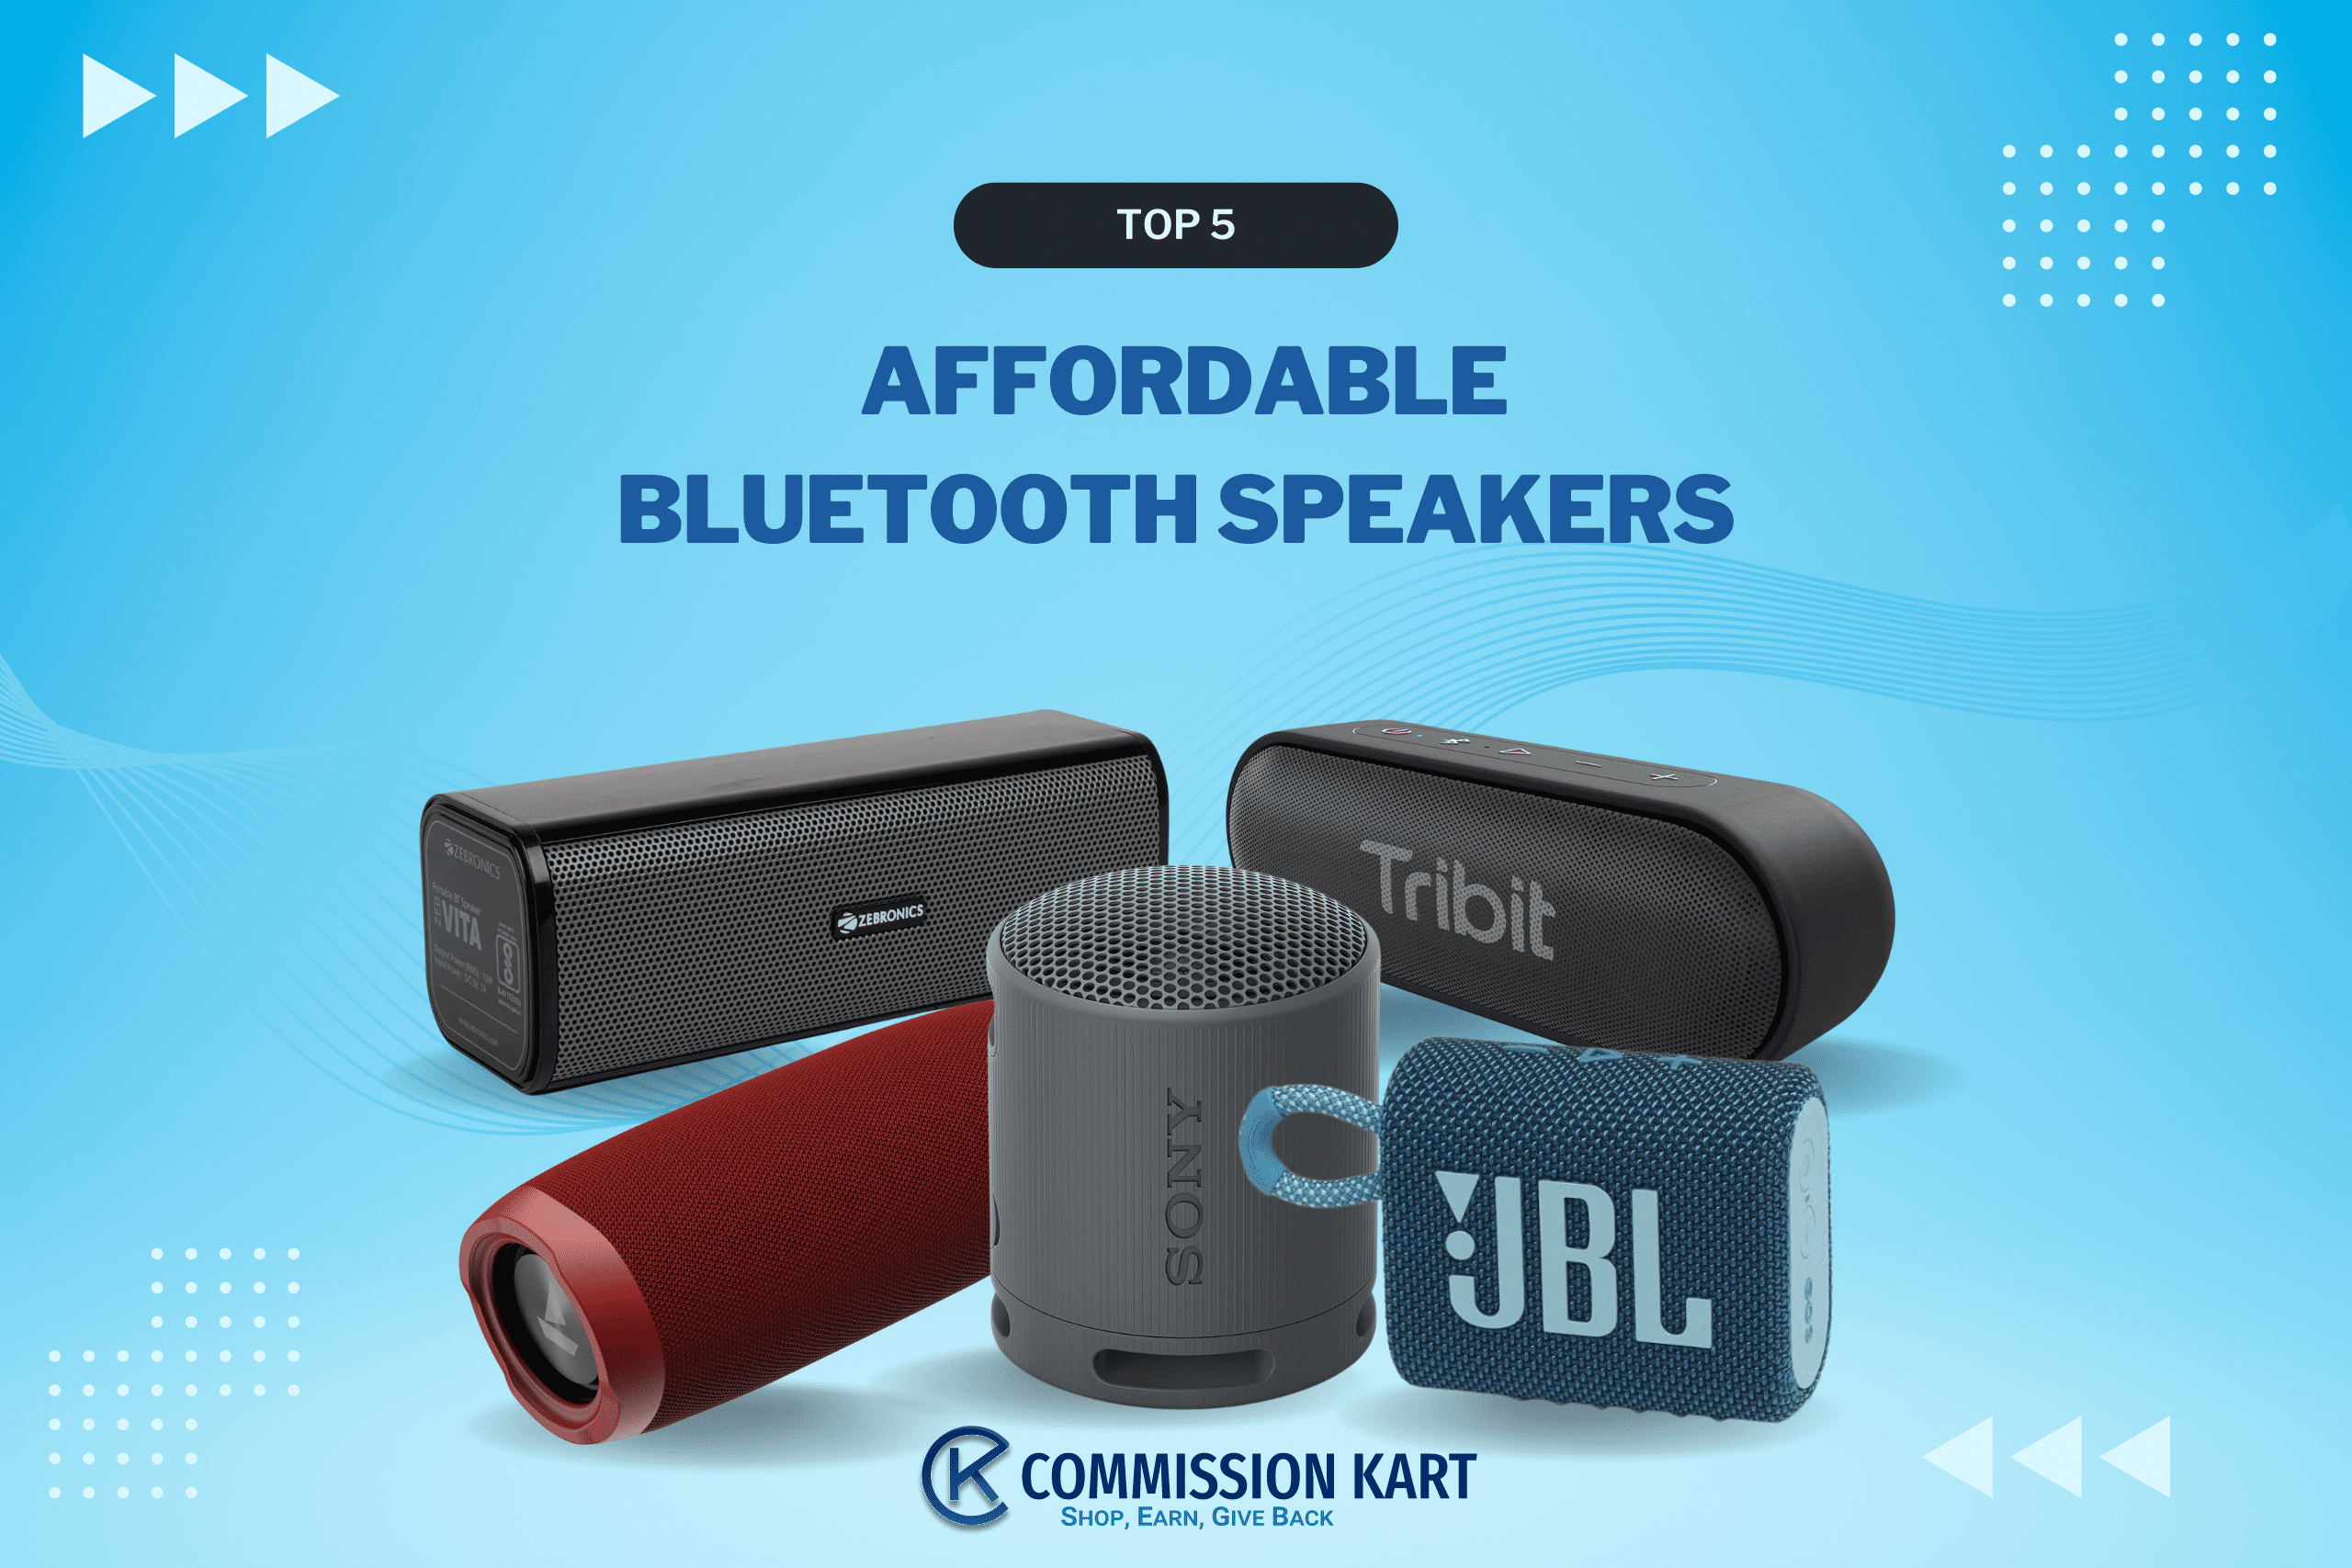 Title: Top 5 Affordable Bluetooth Speakers in India Under ₹2000